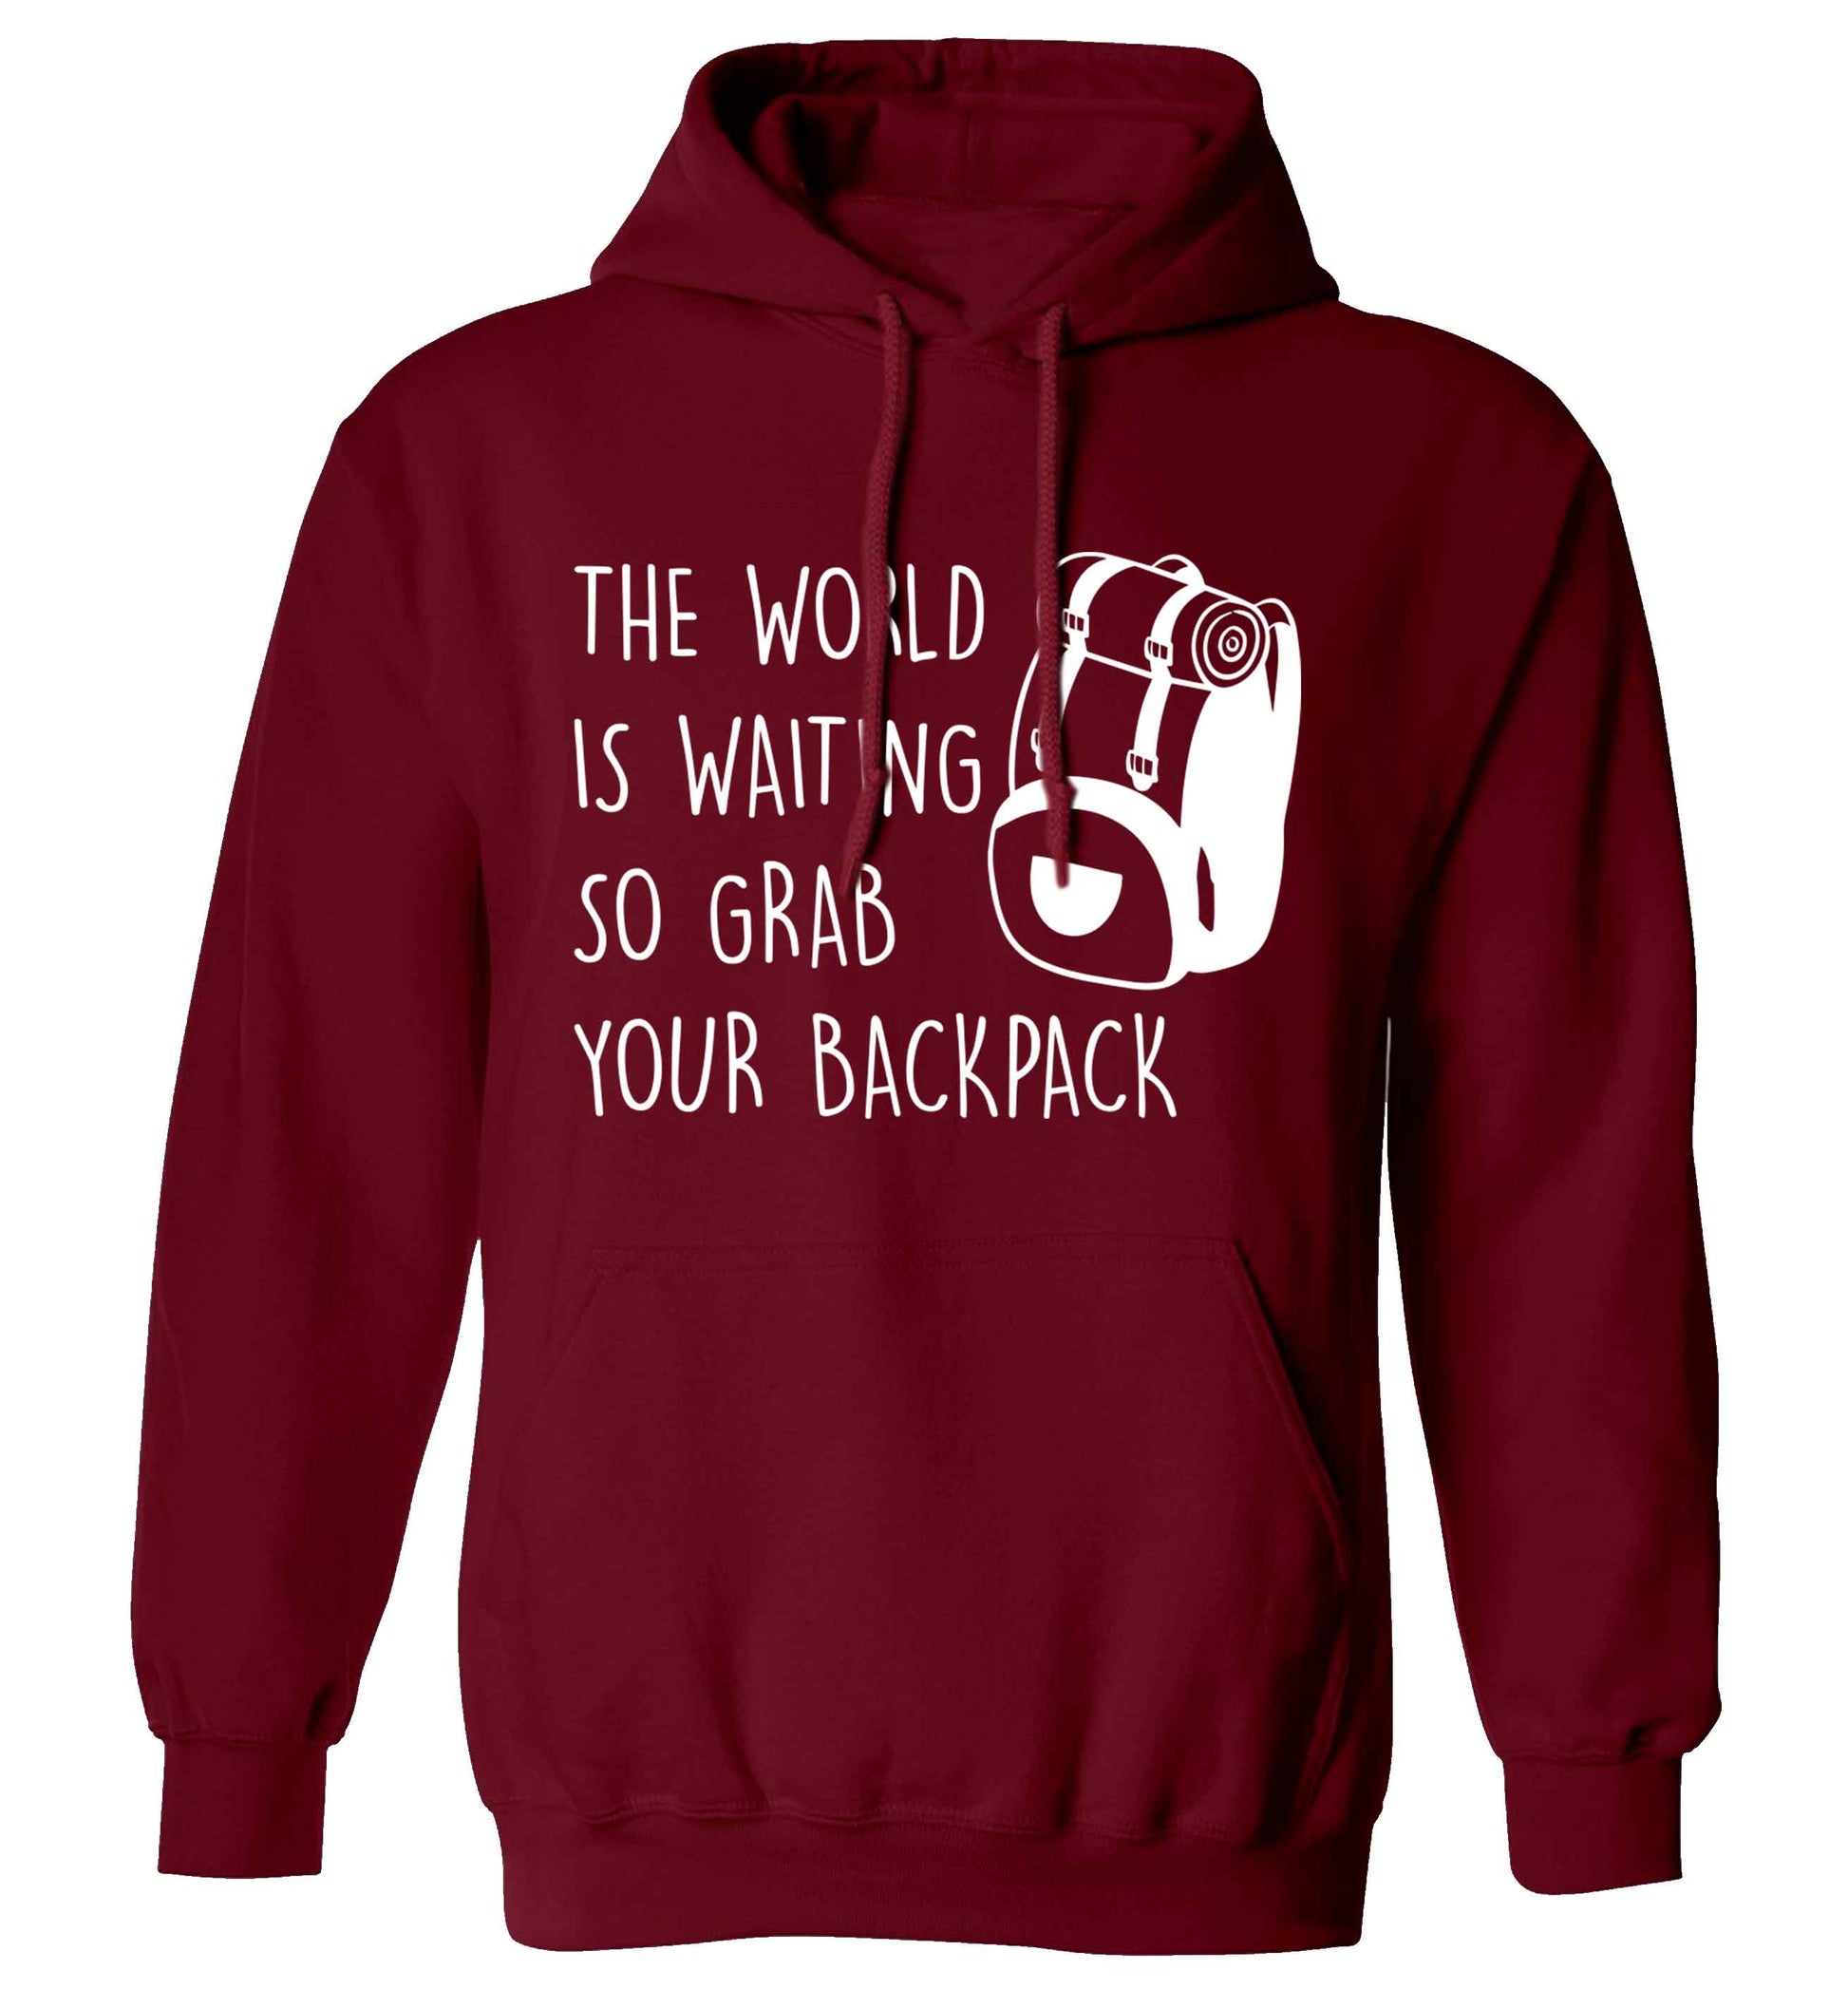 The world is waiting so grab your backpack adults unisex maroon hoodie 2XL